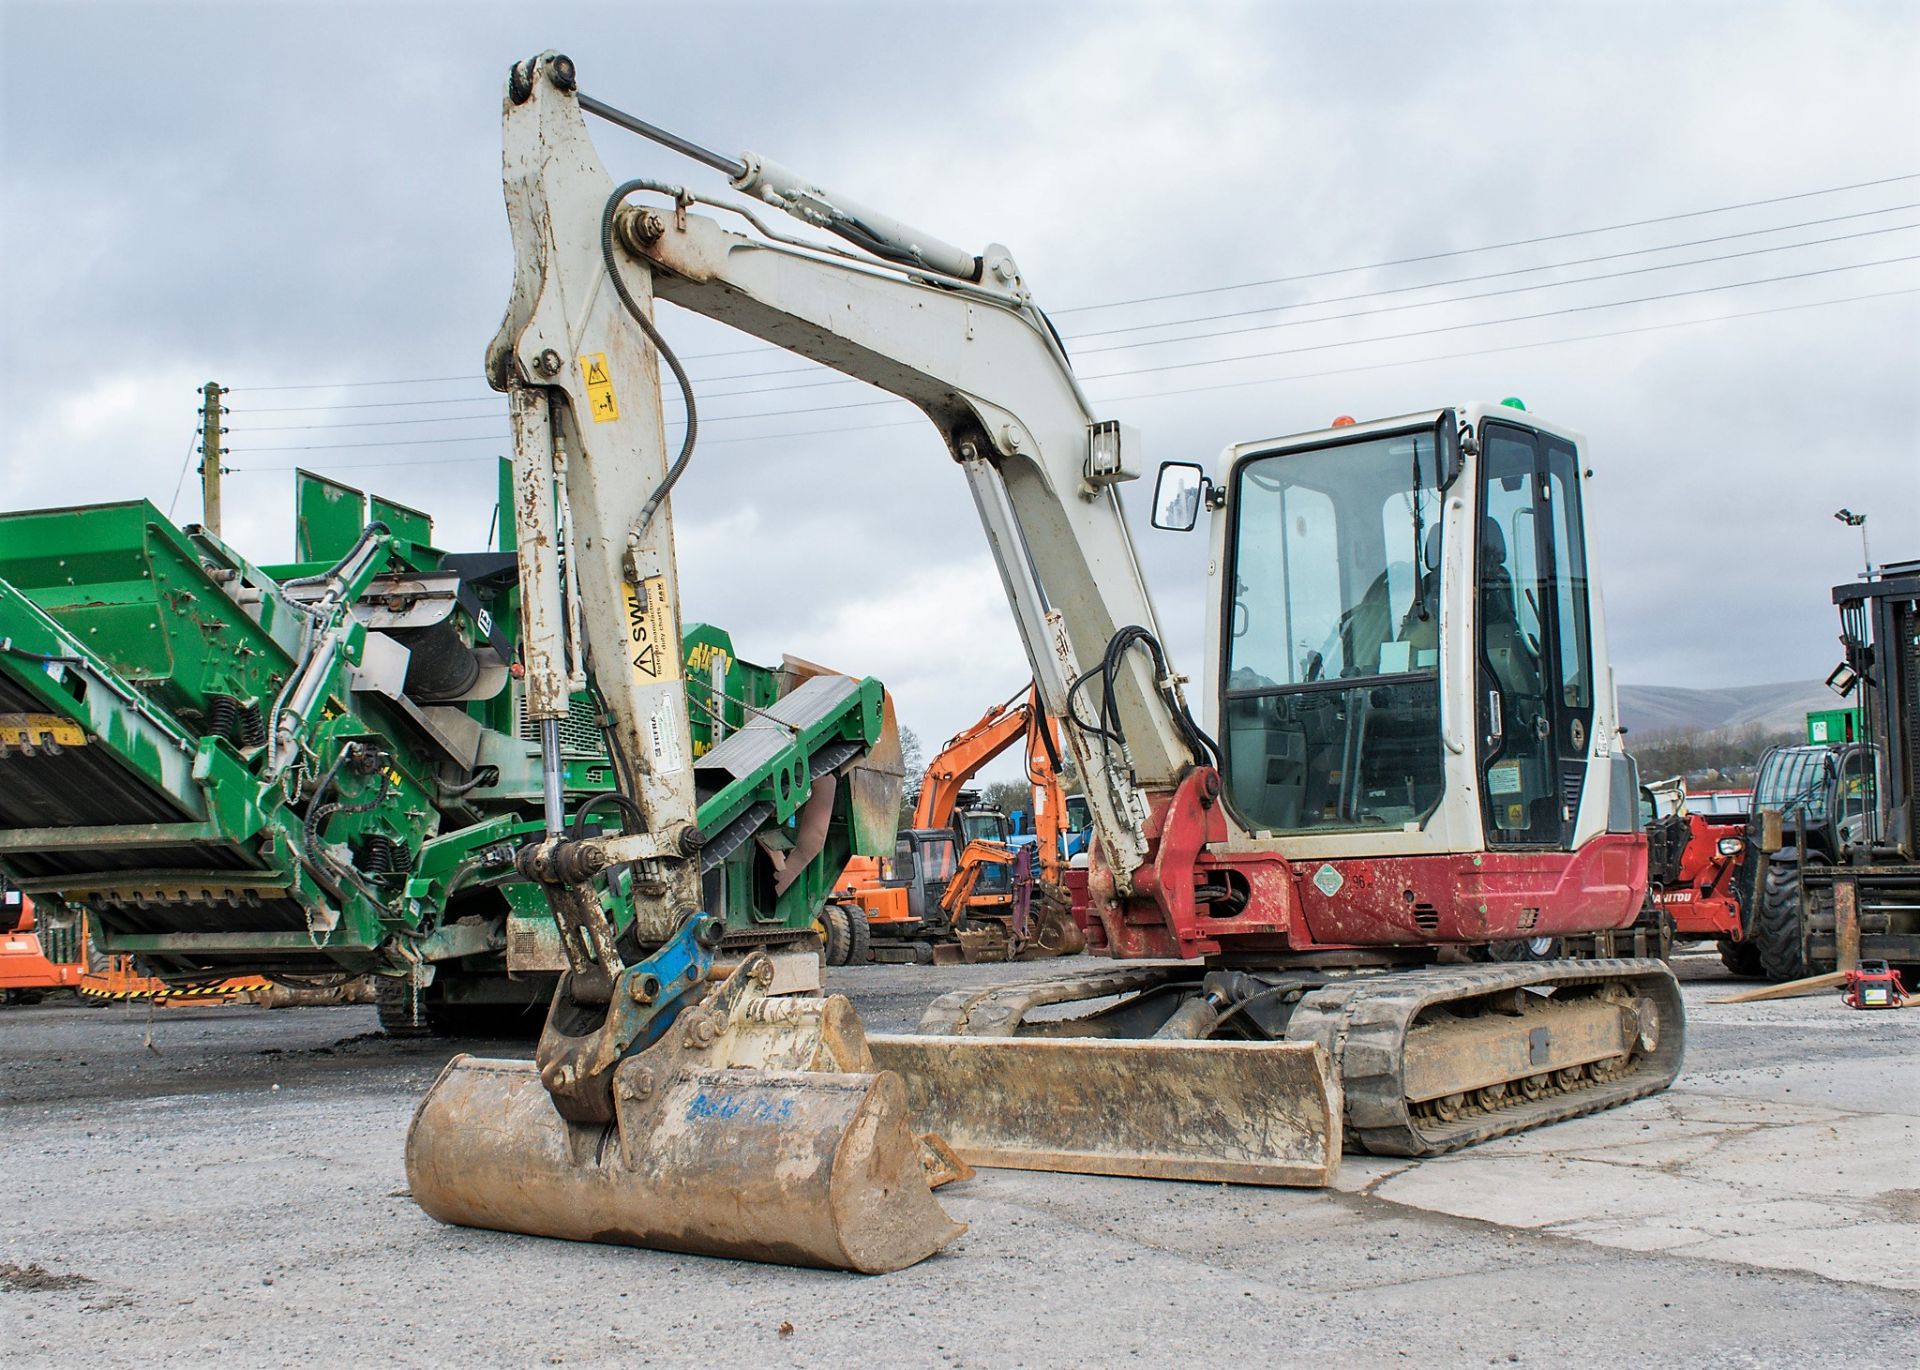 Takeuchi TB250 5 tonne rubber tracked excavator Year: 2014 S/N: 3660 Recorded Hours: 6247 blade,